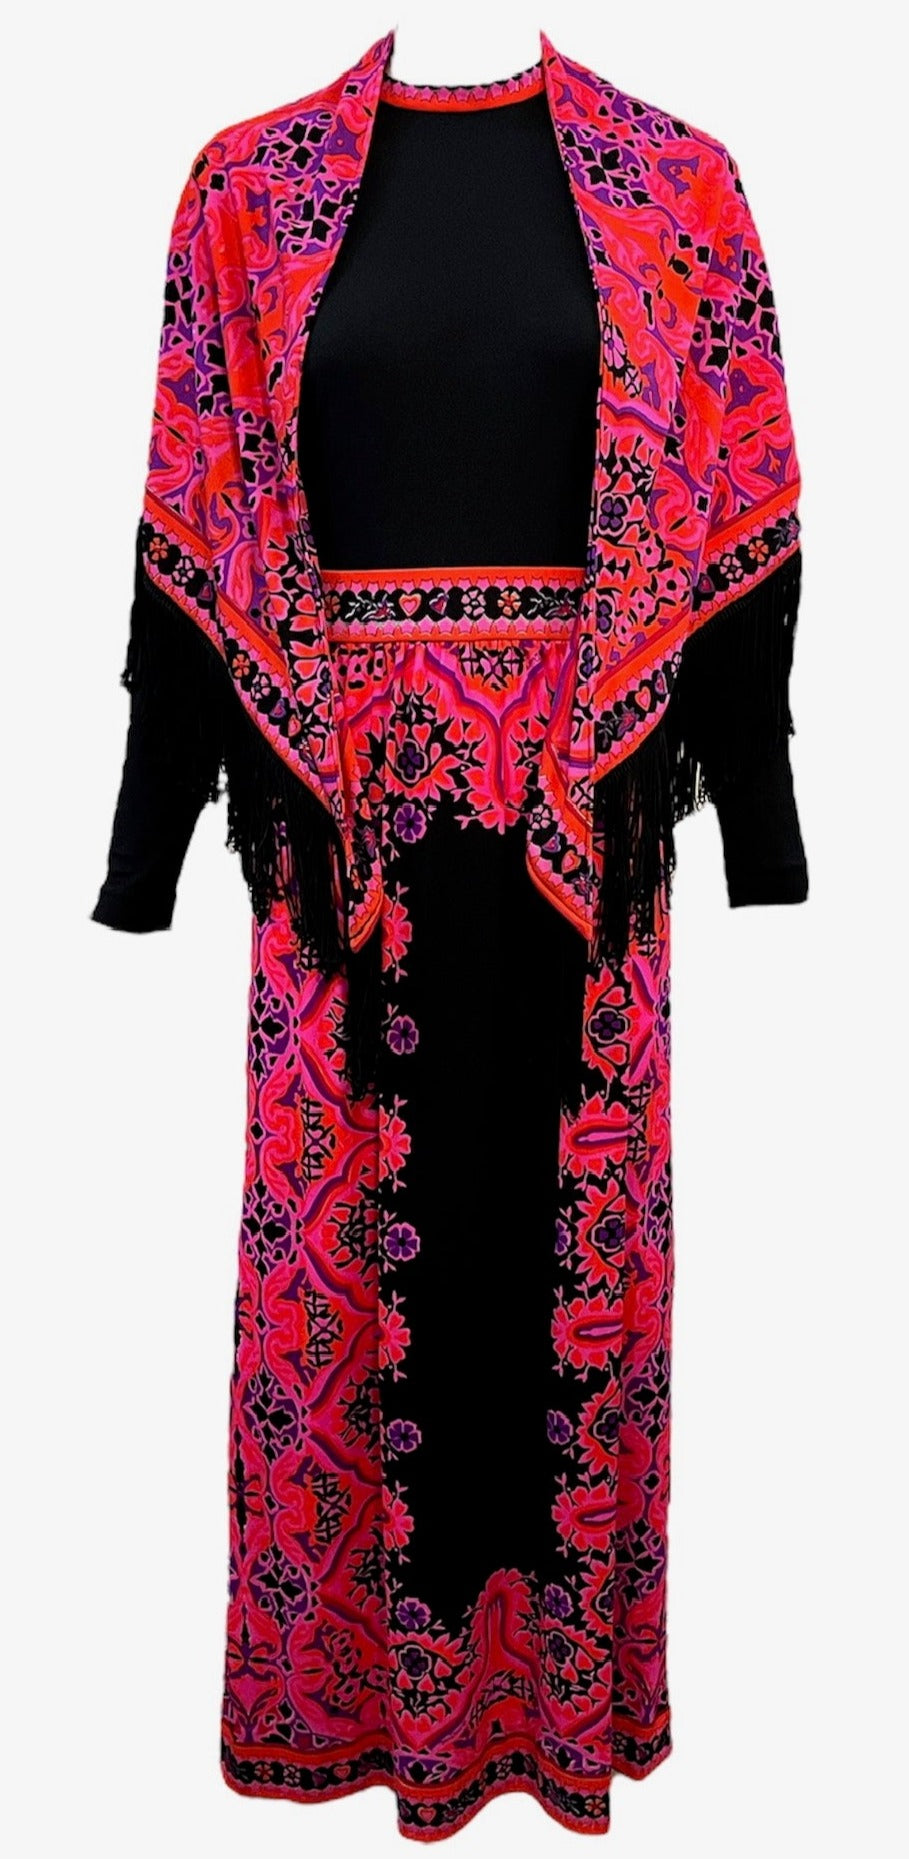 Mr.Dino 1970s Black and Hot Pink Maxi Dress with Fringed Shawl FRONT 1 of 7